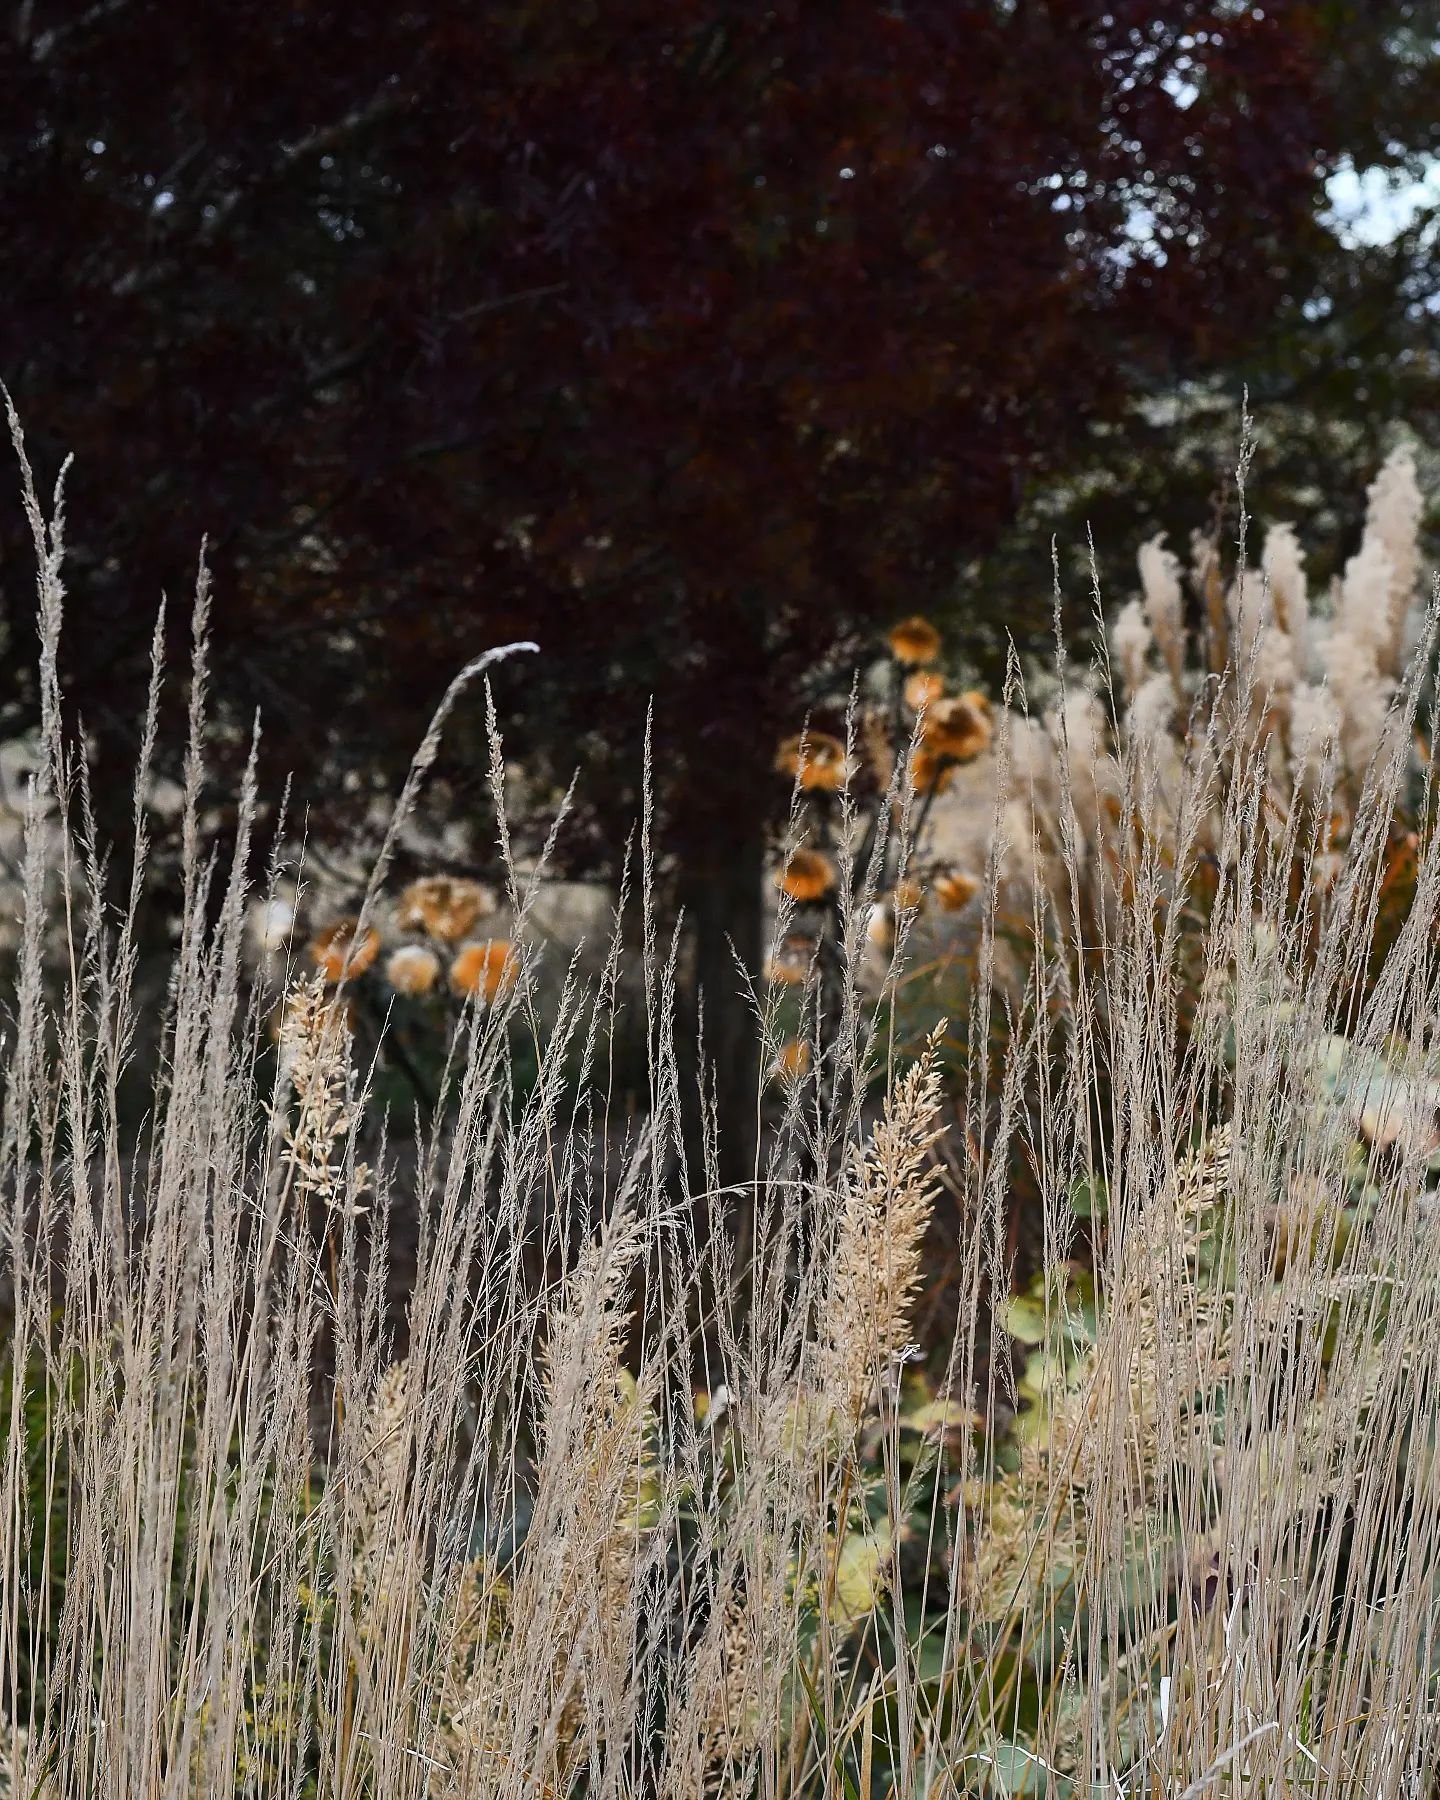 It's the season for the grasses, stripped bleached stems and foaming seeds. I'm loving them against the nearly black foliage and shadow of the claret ash (slowly turning red). In The Storytelling Garden Workshop we talk a lot about the usefulness of 